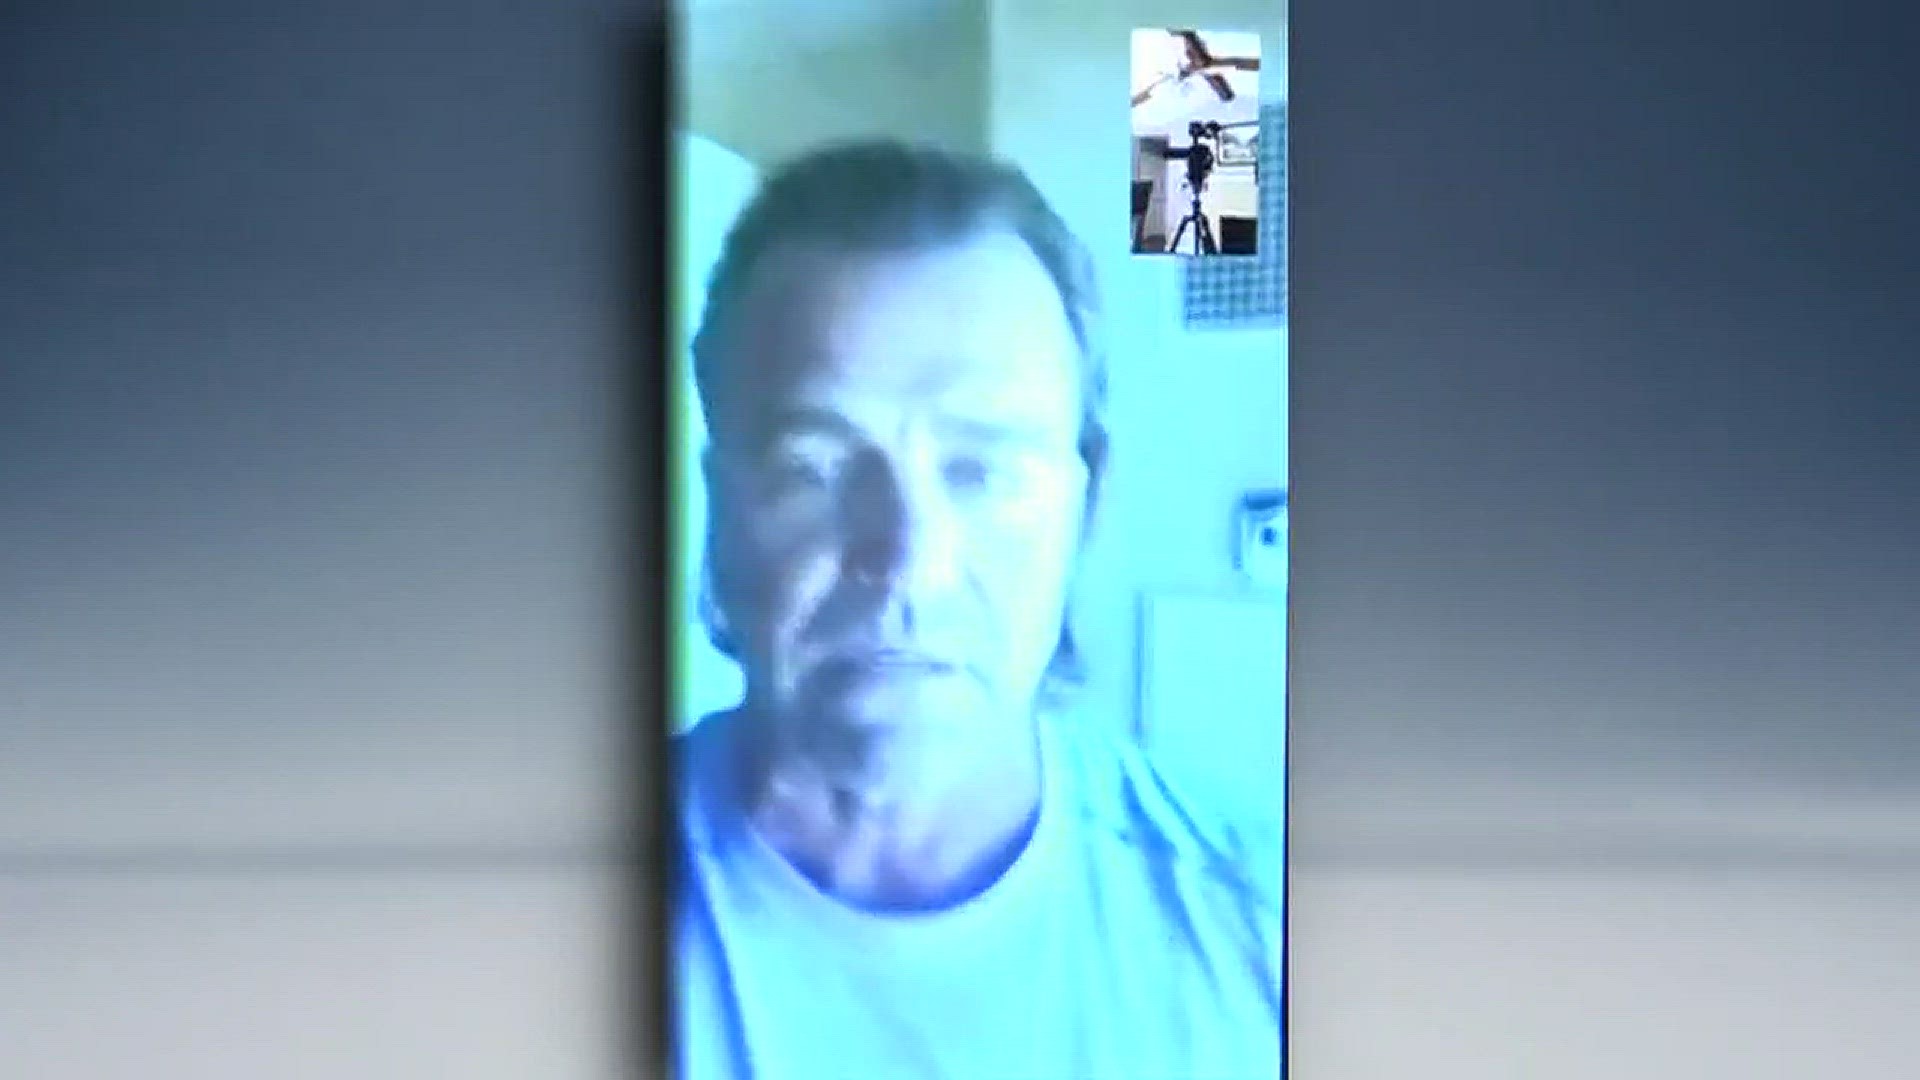 A Boerne man witnessed the Las Vegas shooting unfold from the same hotel as the suspected shooter. Byron Velvick was staying on the 25th floor at the Mandalay Bay and Resort.